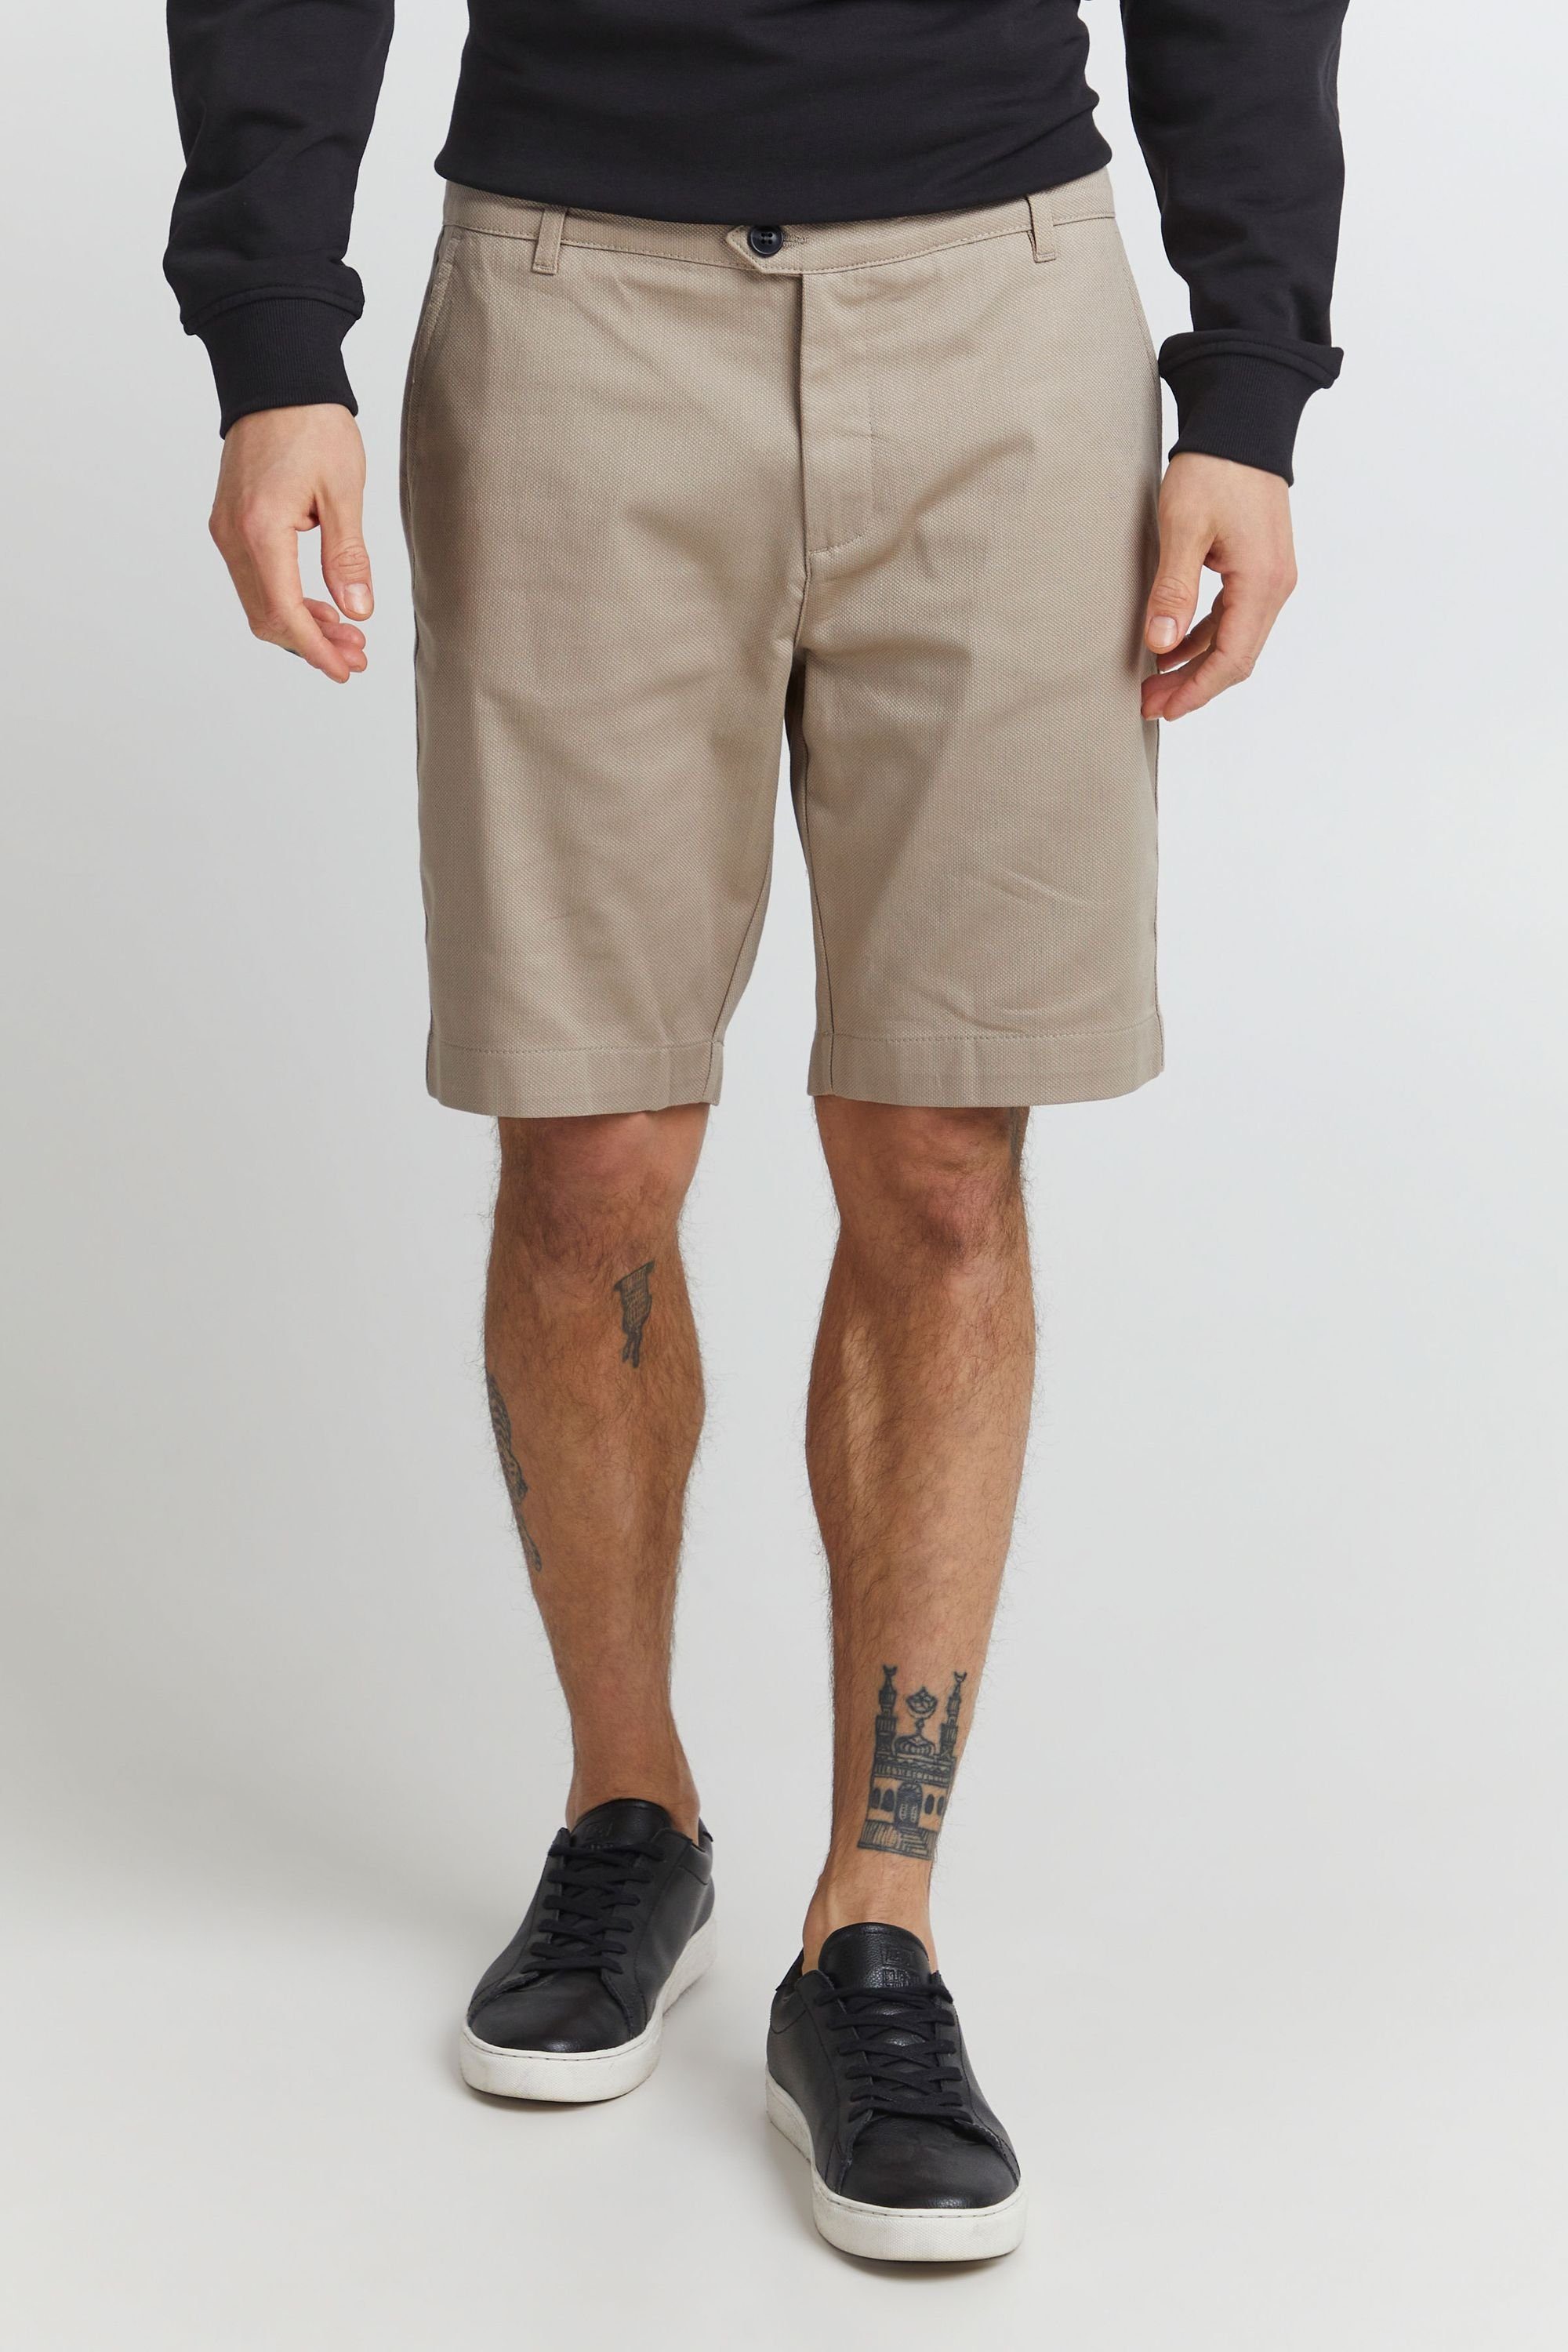 !Solid Shorts SDFred Structure SHO - 21107204 OATMEAL (130401)